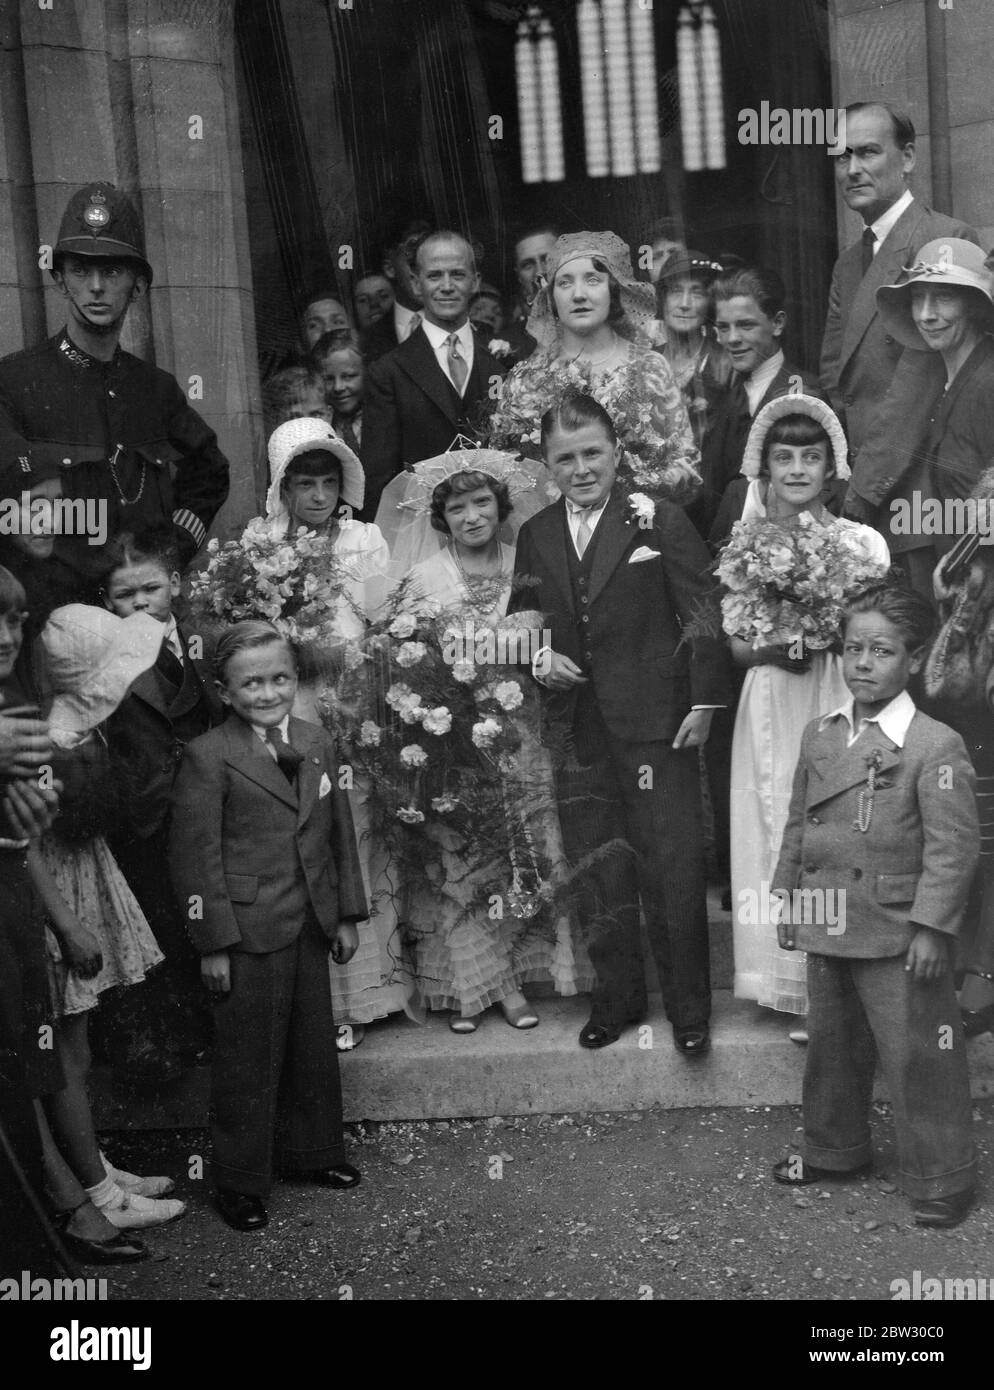 England ' s tiniest bride and groom marry at Mitcham . Miss Dorothy Kathleen Griffiths , who is only 3 feet 10 inches tall , and Mr Vivian Pascoe , who is two inches taller , both belonging to a midget circus troupe were married at St Barnabas Church , Mitcham , Surrey . The wedding was attended by members of the Theatrical Company with whom they are playing . The bride and groom with the bridal party at the wedding . 14 August 1932 Stock Photo